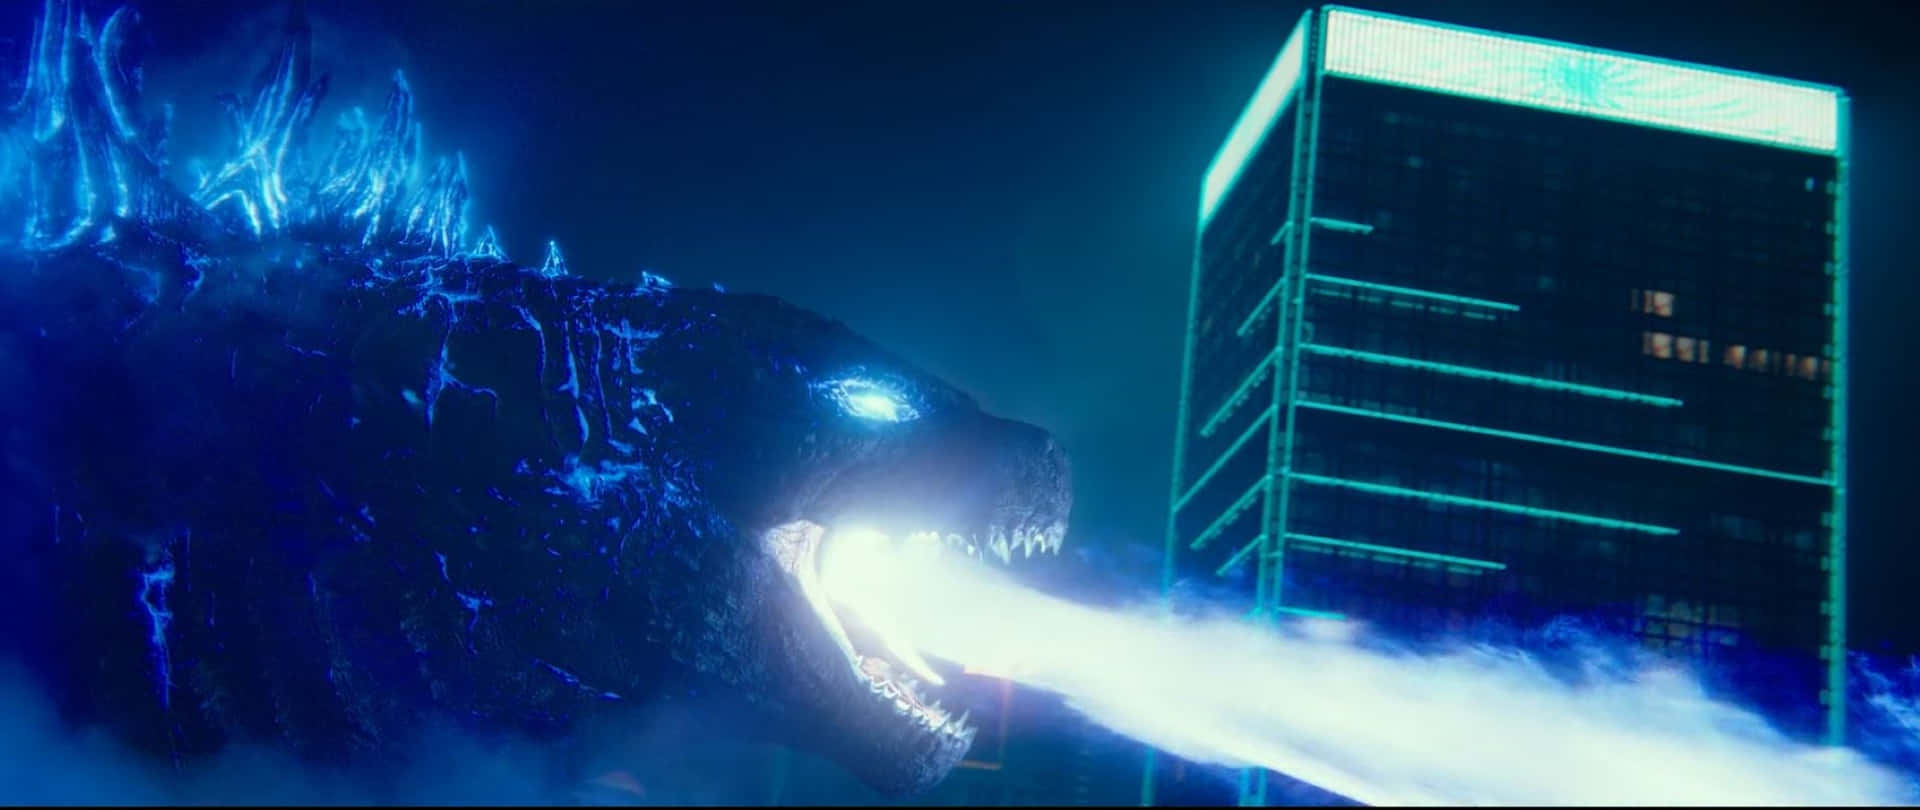 Godzilla unleashes its iconic atomic breath in a stunning display of power Wallpaper